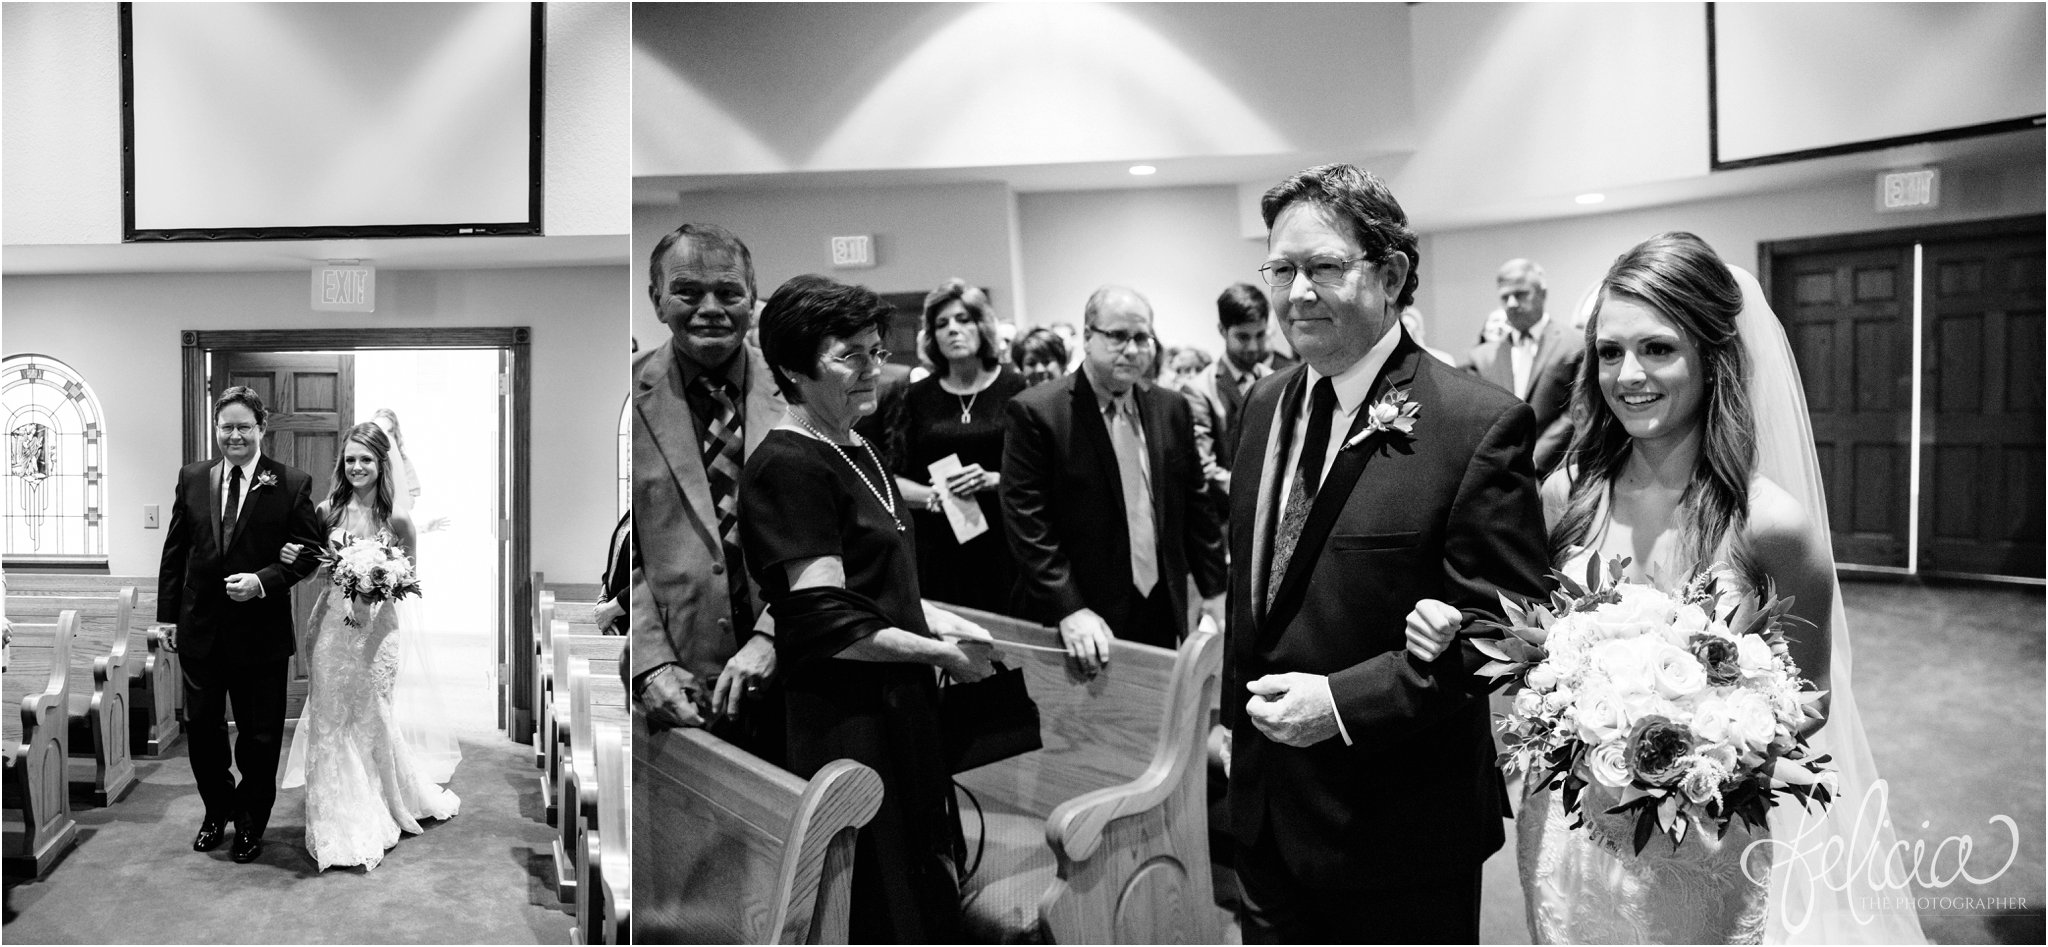 black and white | wedding | wedding photos | industrial | Rumely Event Space | wedding photography | images by feliciathephotographer.com | West Bottoms | wedding ceremony | The Providence Baptist Church | bride arrival | here comes the bride | father of the bride | walking down the aisle 